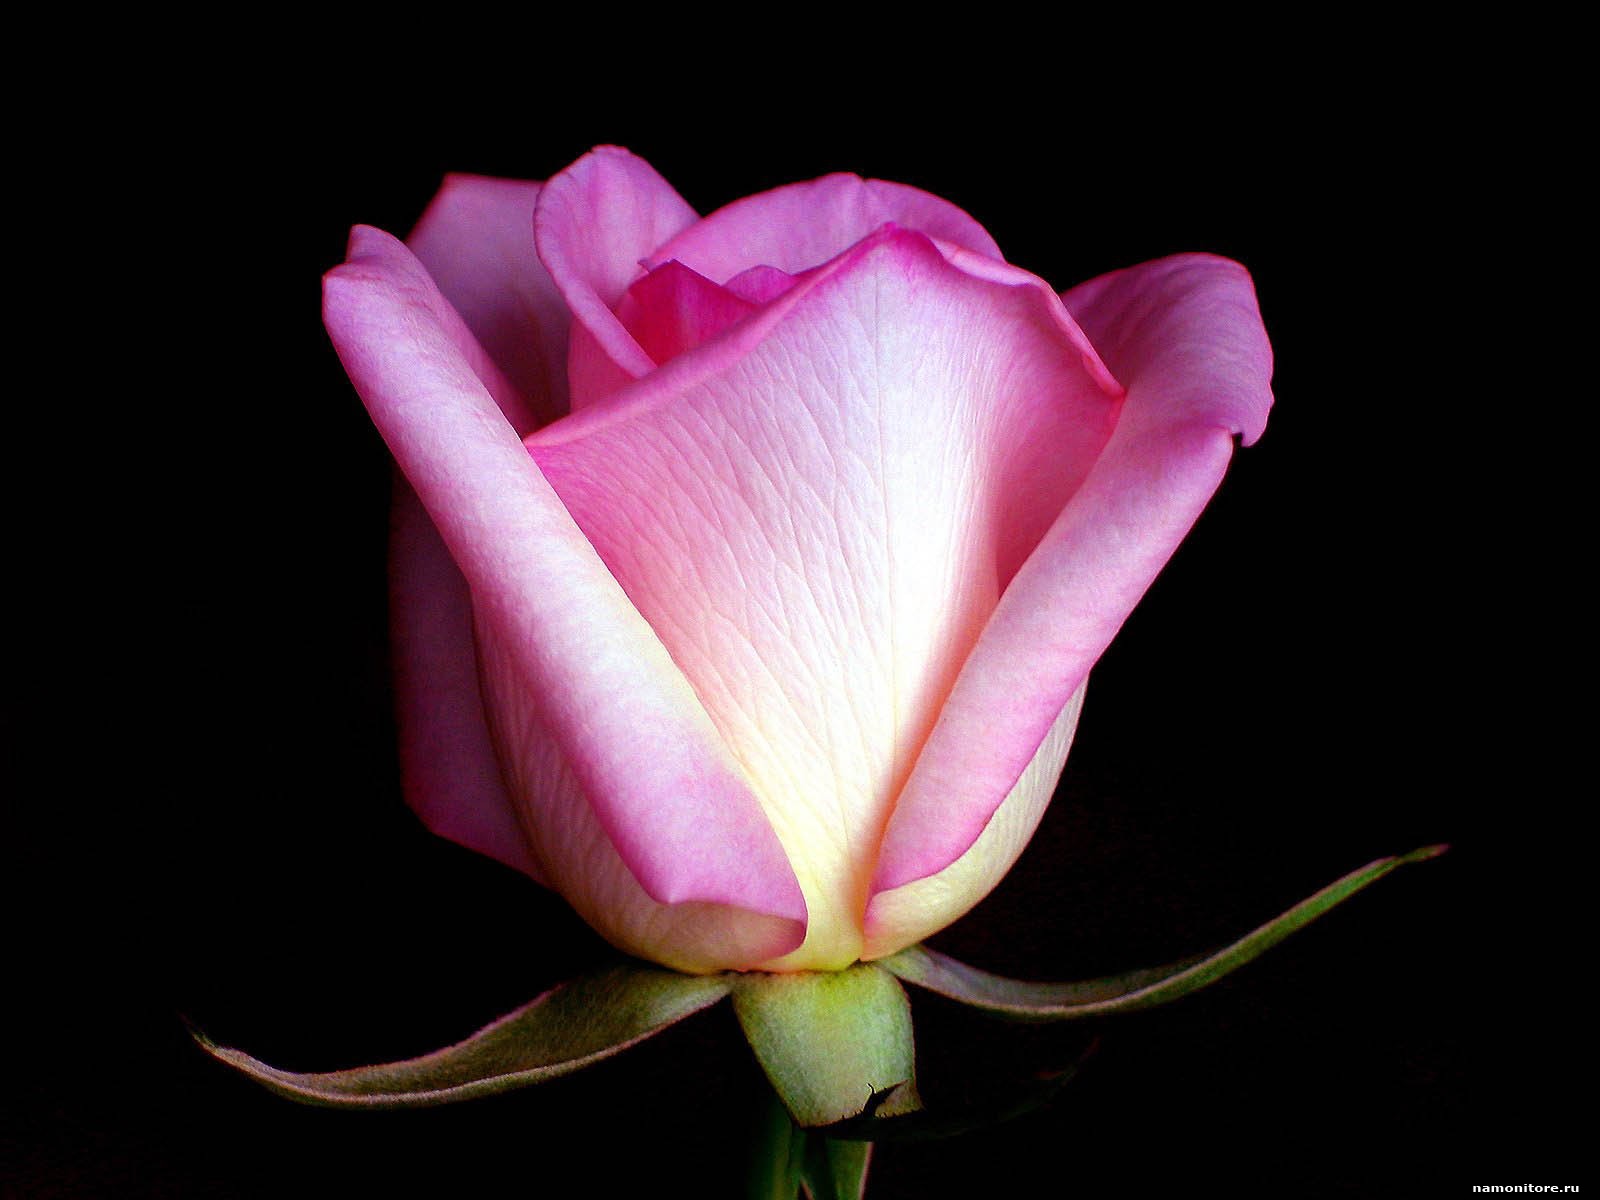  Bud A pink rose on a black background flowers pink roses 1600x1200